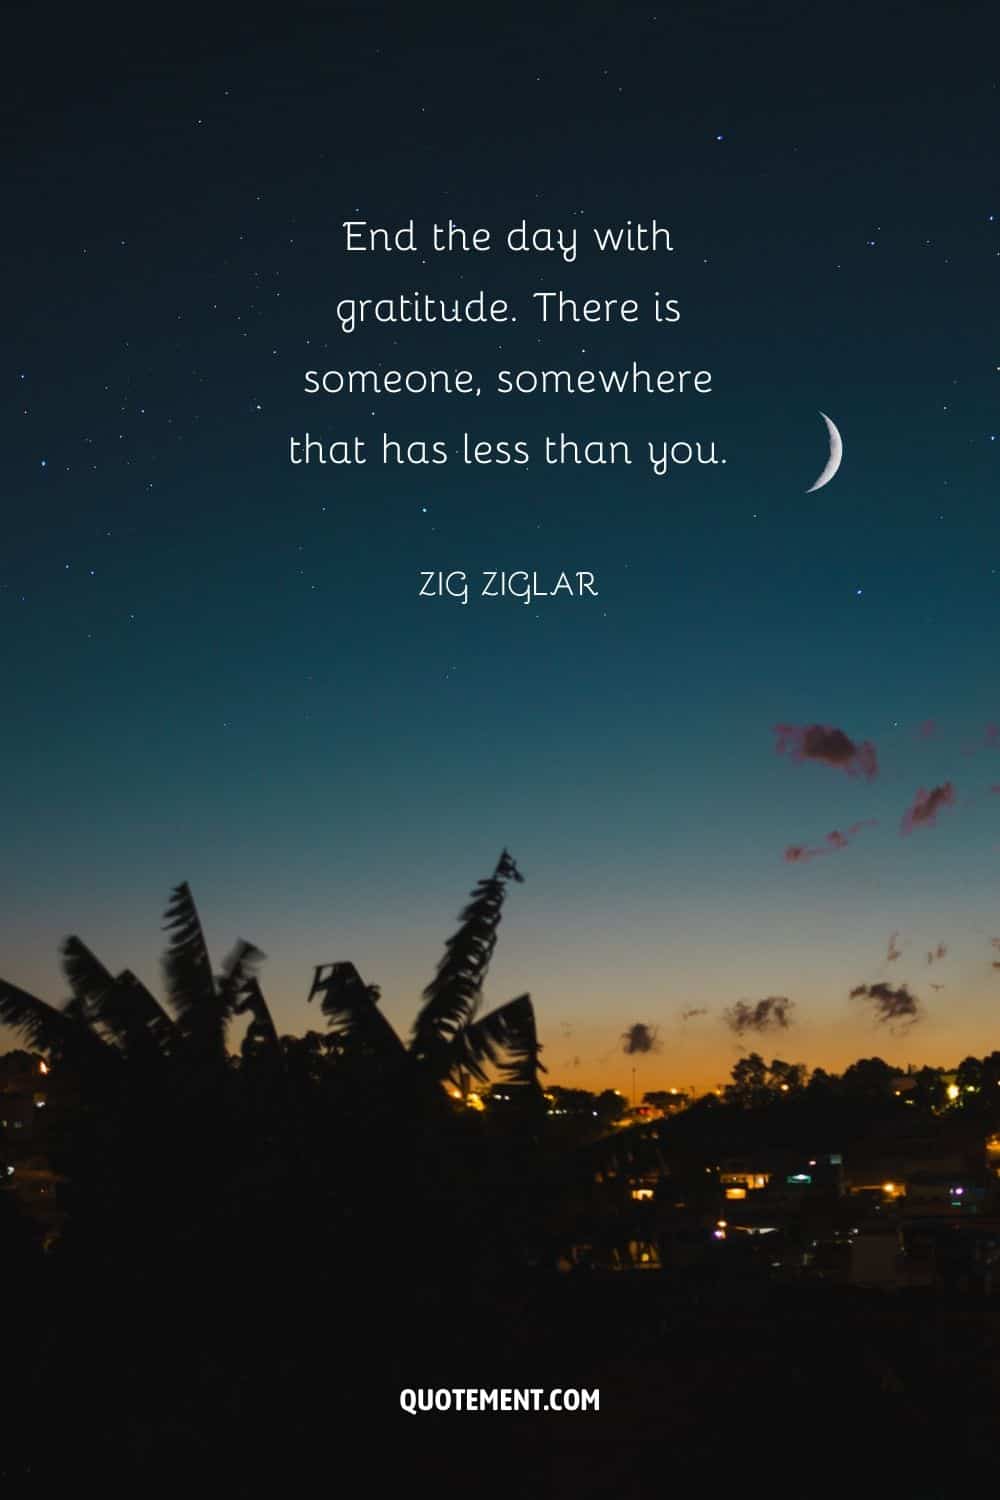 End the day with gratitude. There is someone, somewhere that has less than you